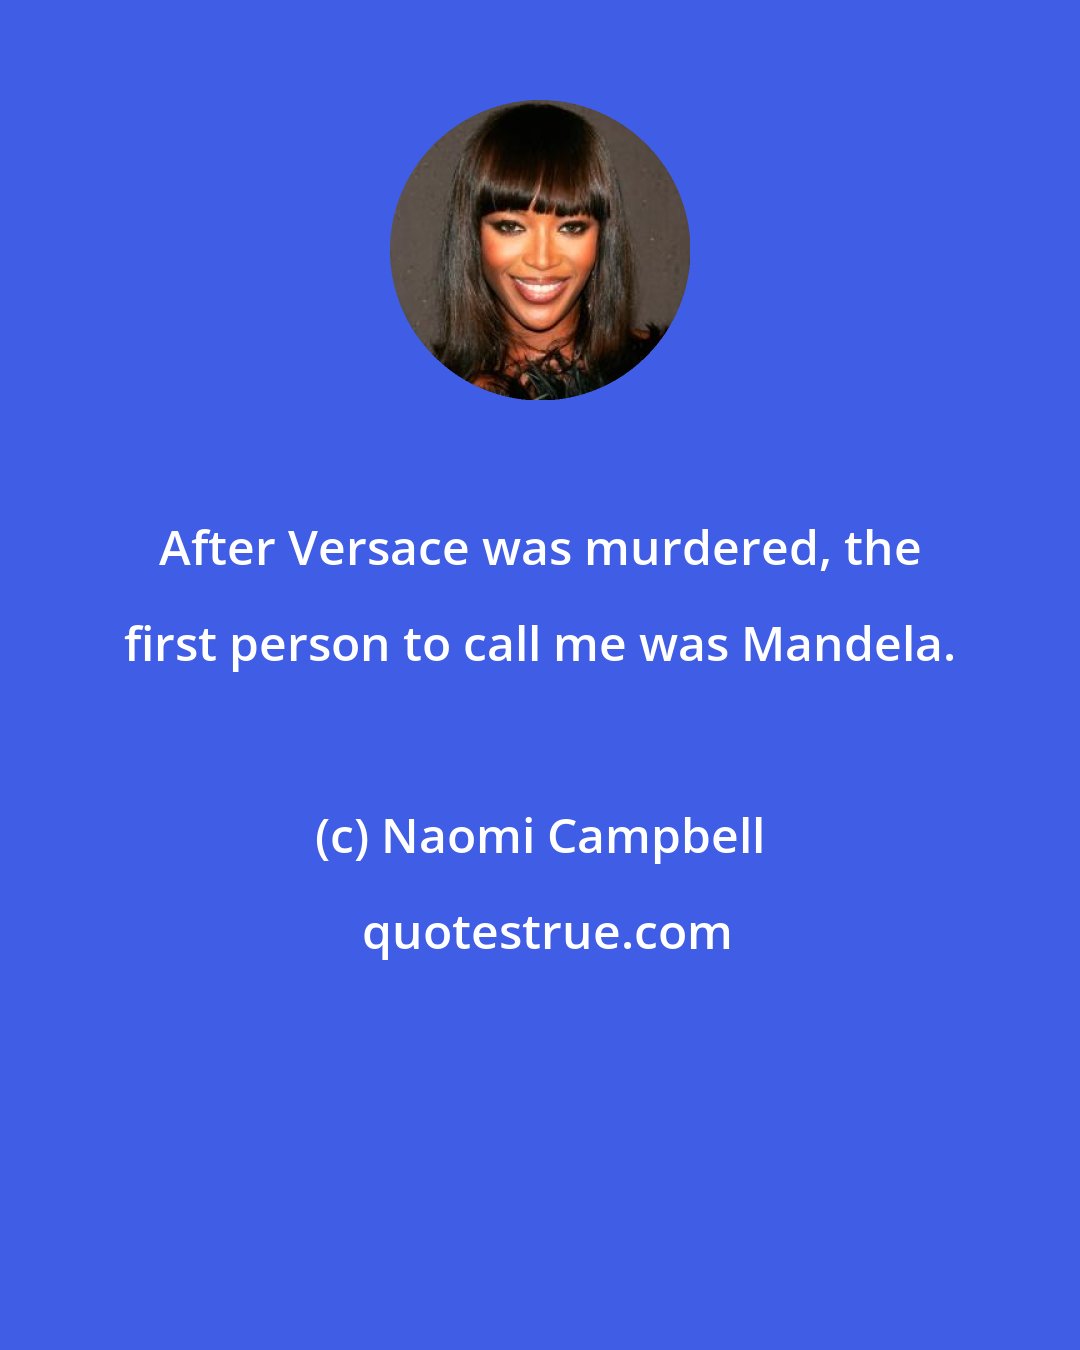 Naomi Campbell: After Versace was murdered, the first person to call me was Mandela.